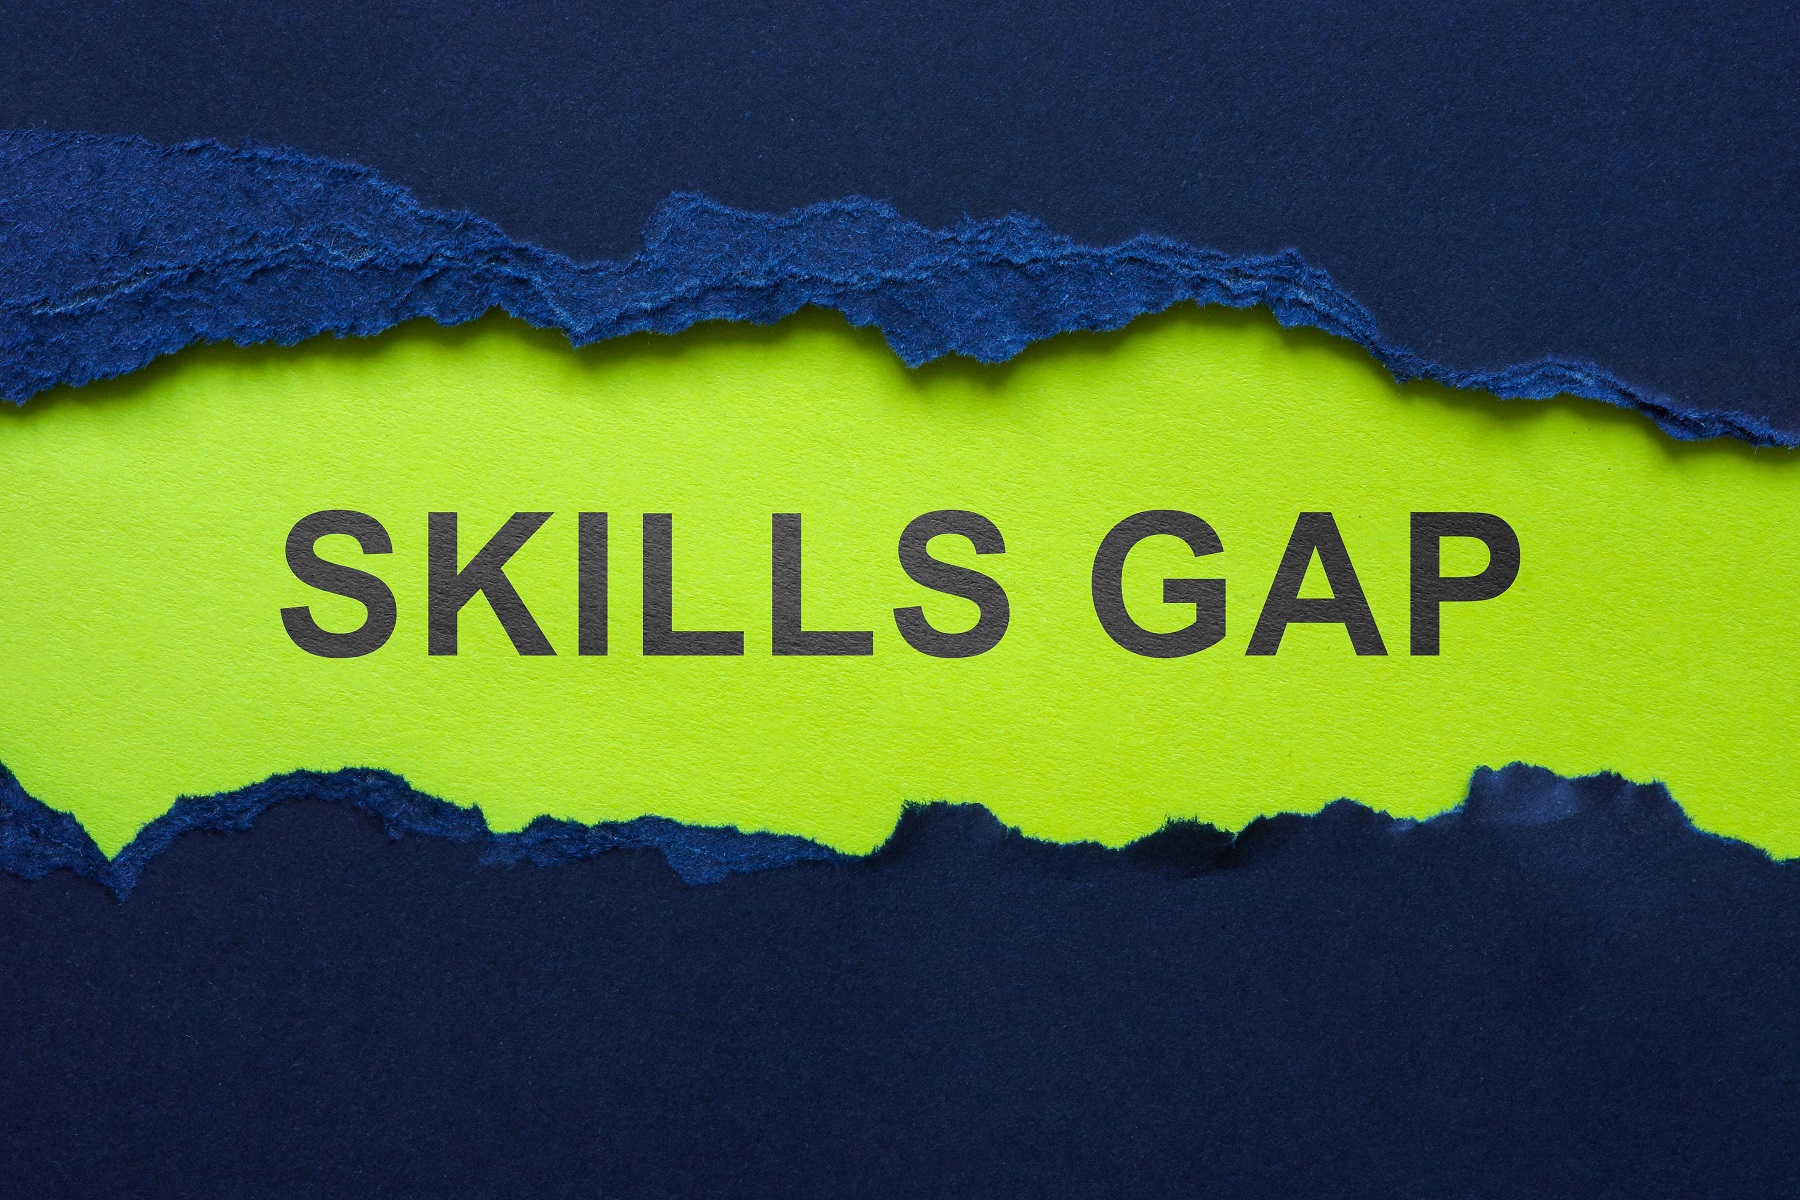 From Dark Reading – There’s Only One Way to Solve the Cybersecurity Skills Gap